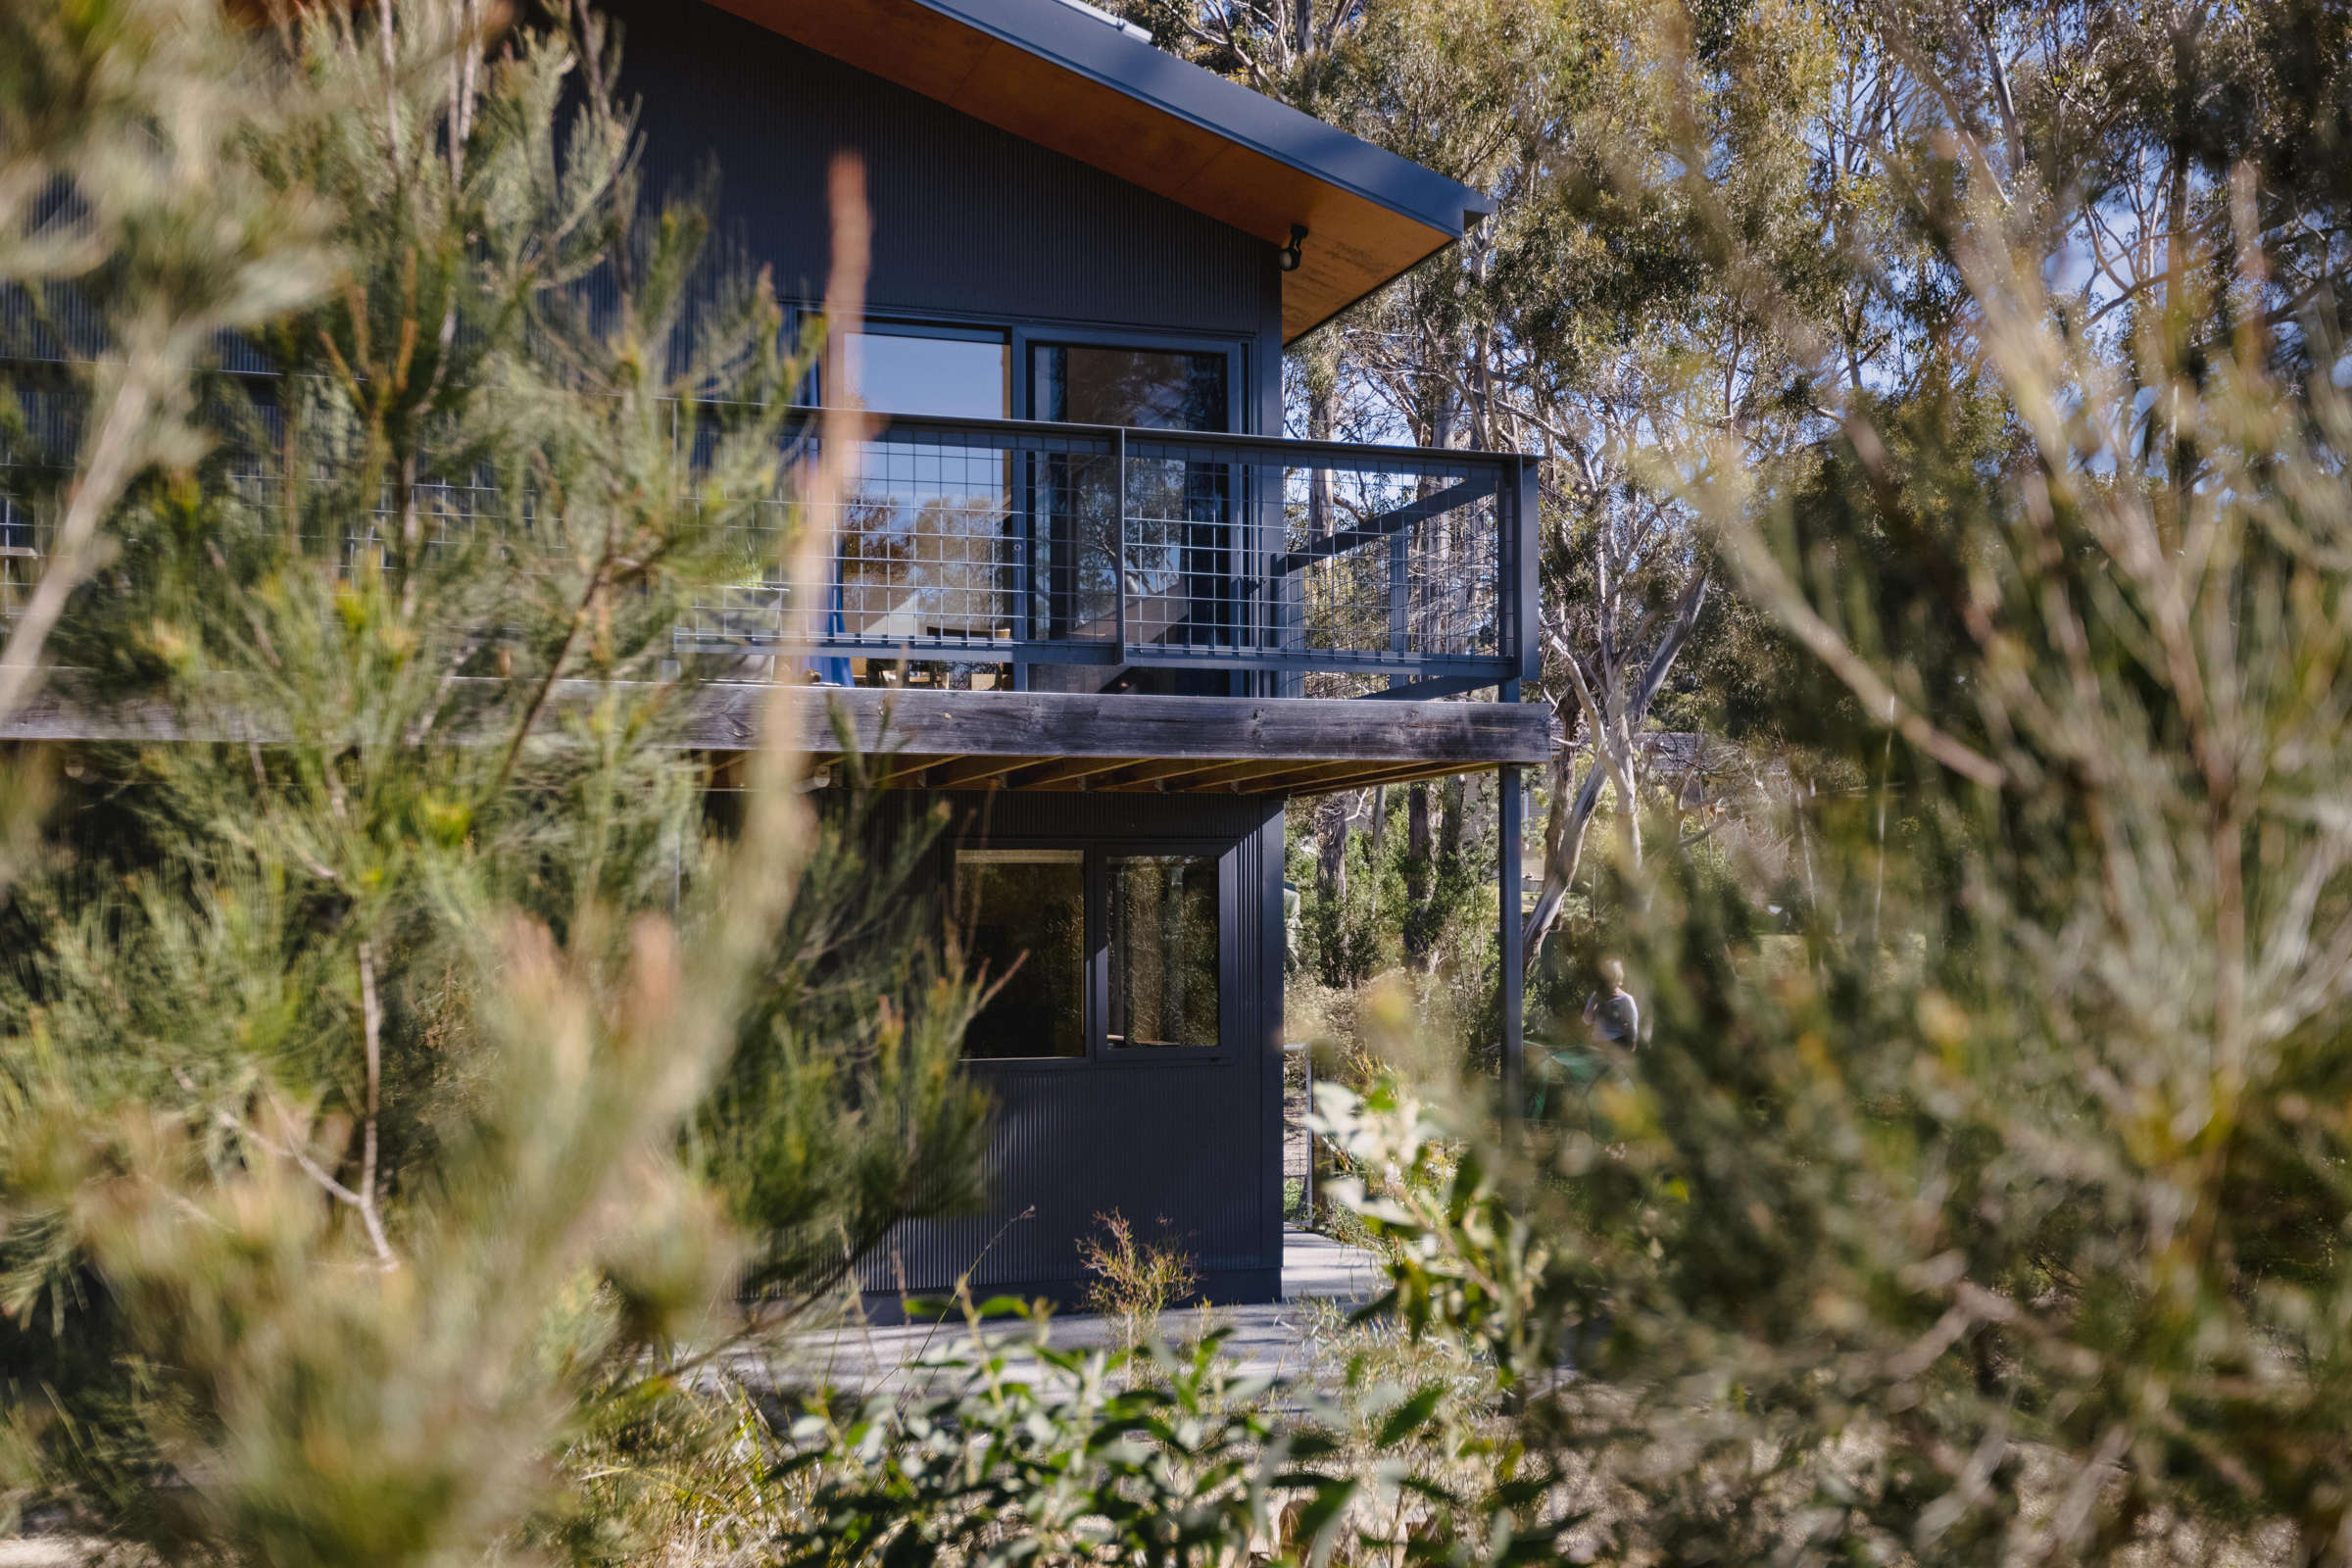 Mt Nelson home renovation, showcasing the built in area under the house, creating two additional bedrooms and a usable under-house storage space, and surrounded by bushland. Photo: Jordan Davis.